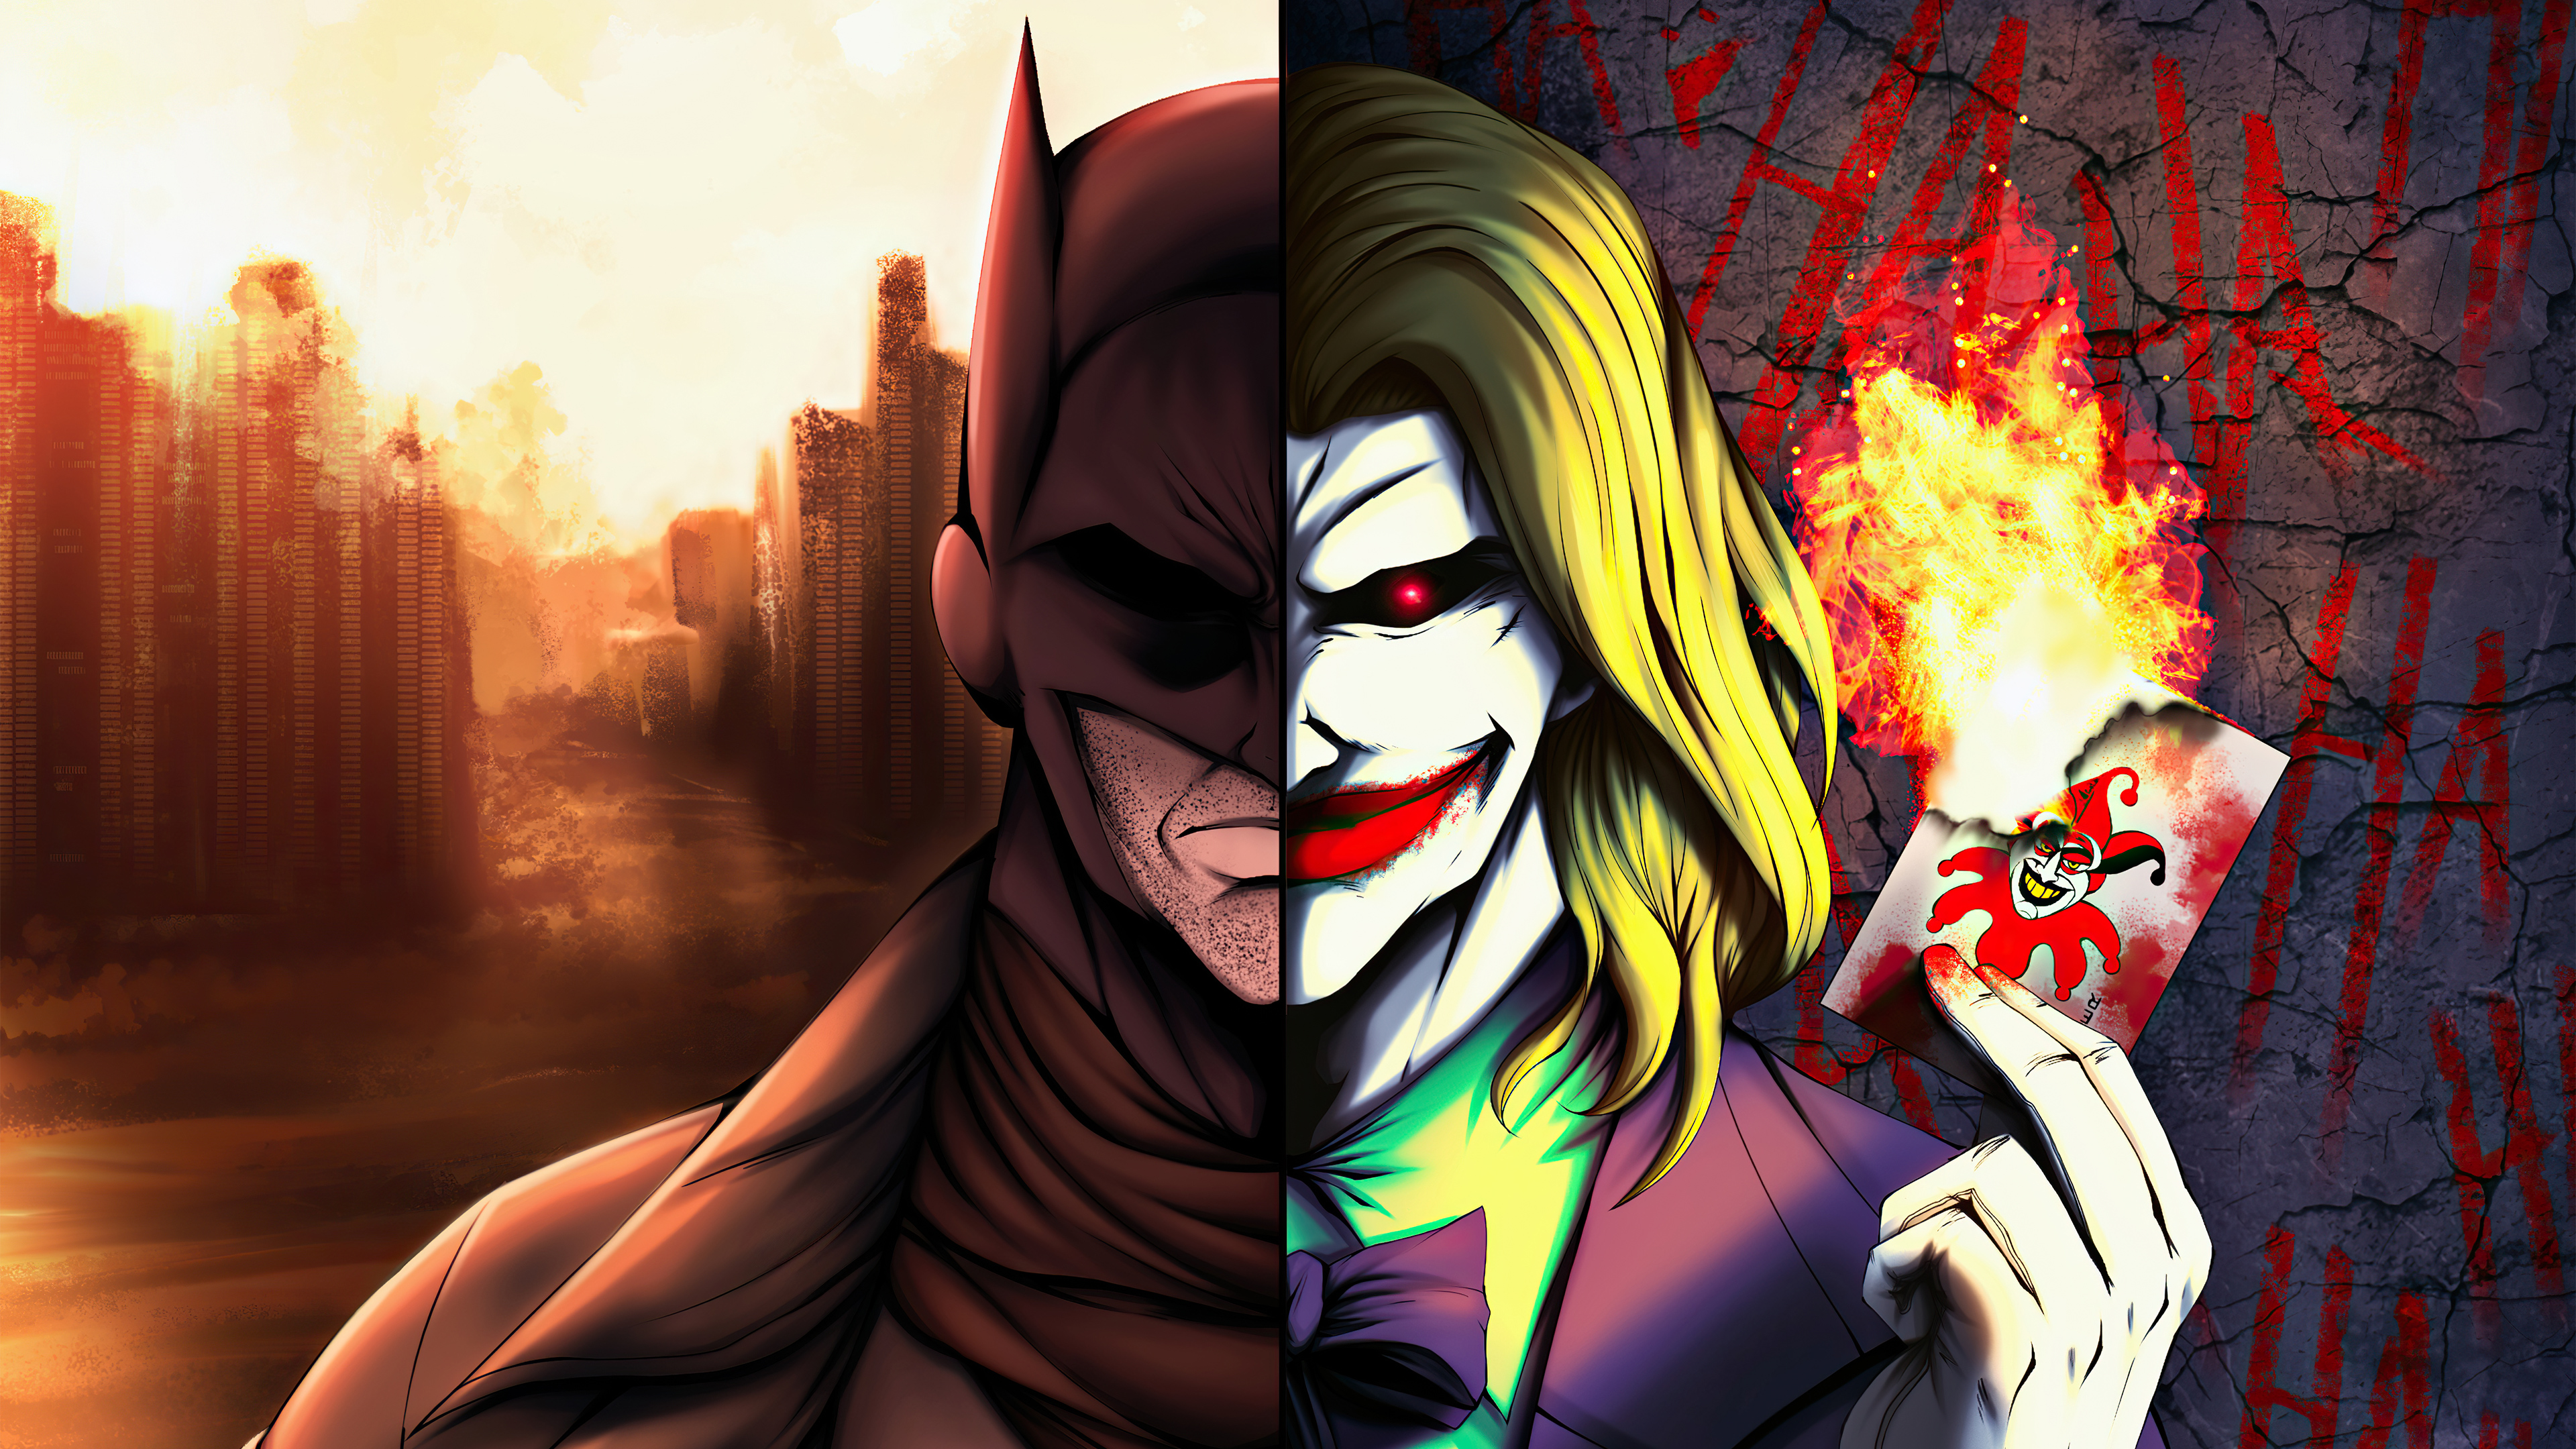 Batman vs joker game of cards k hd superheroes k wallpapers images backgrounds photos and pictures